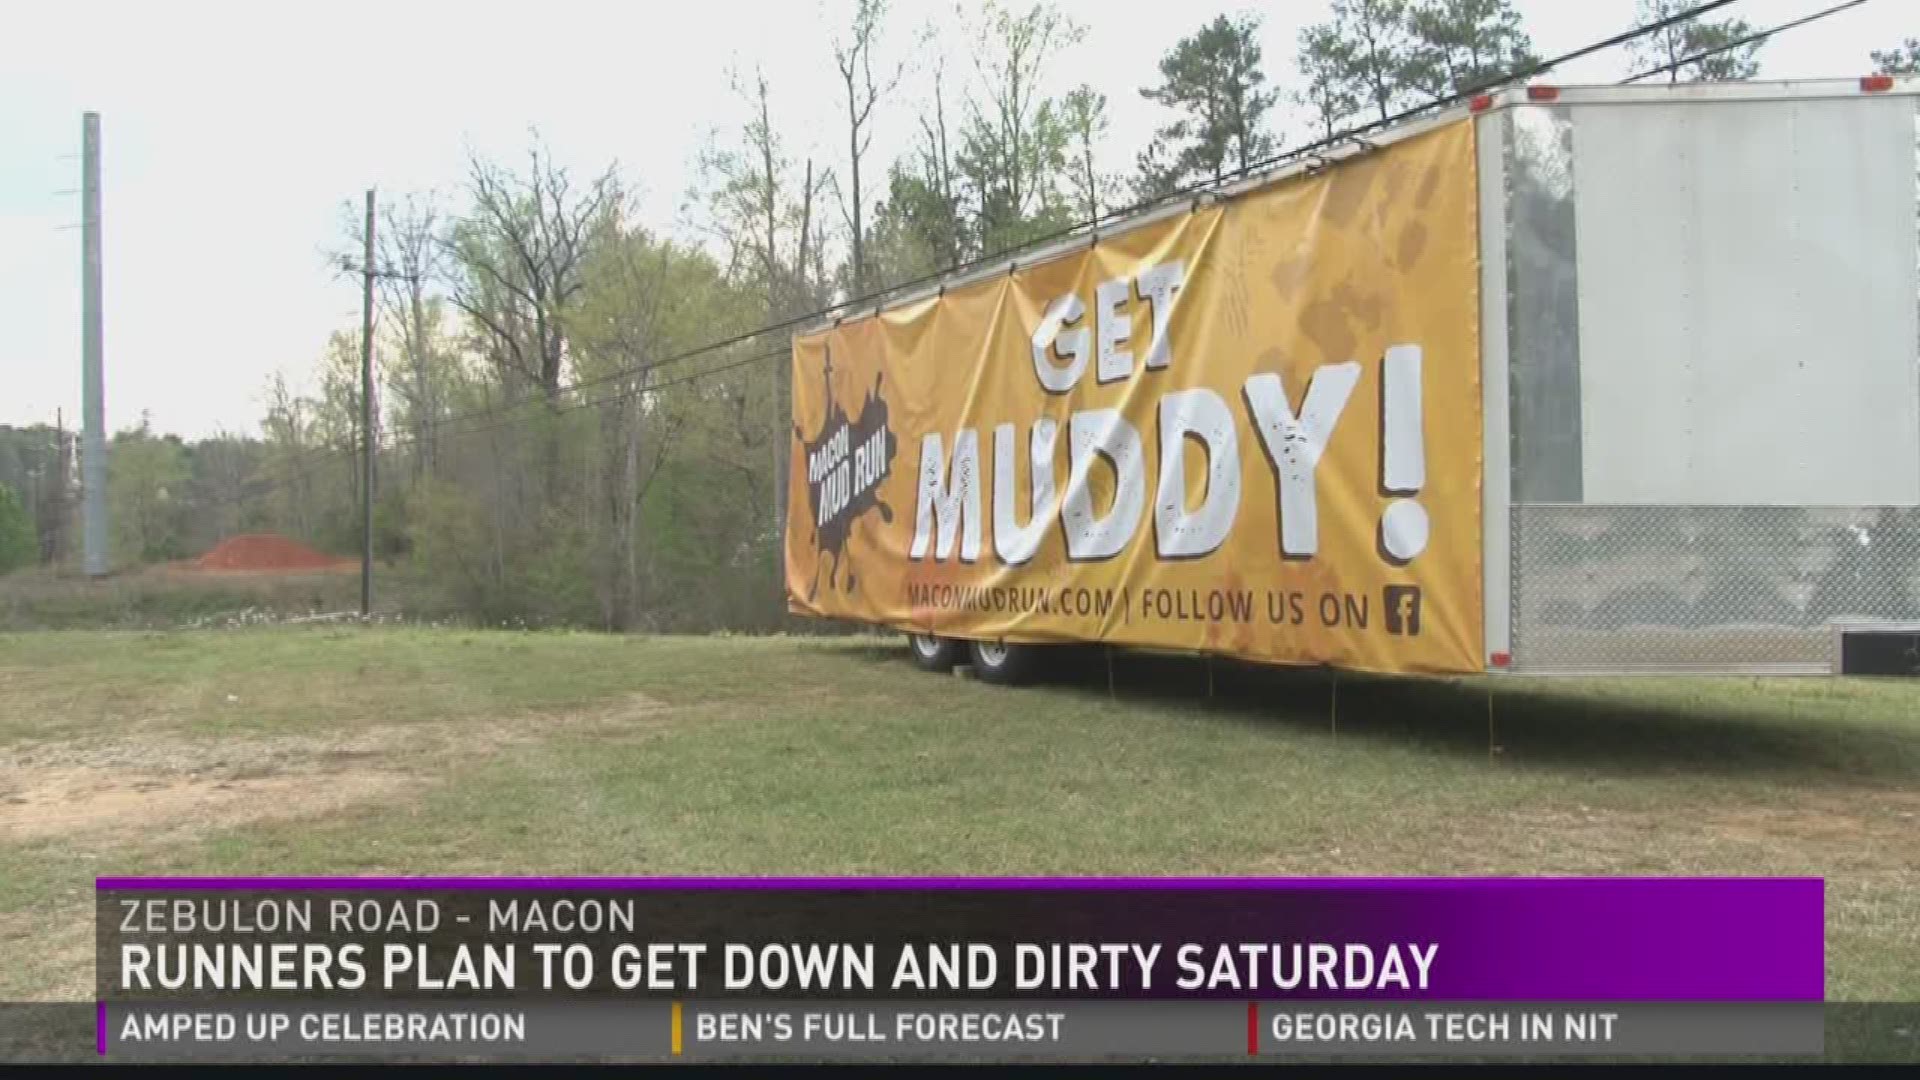 Runners plan to get down and dirty Saturday